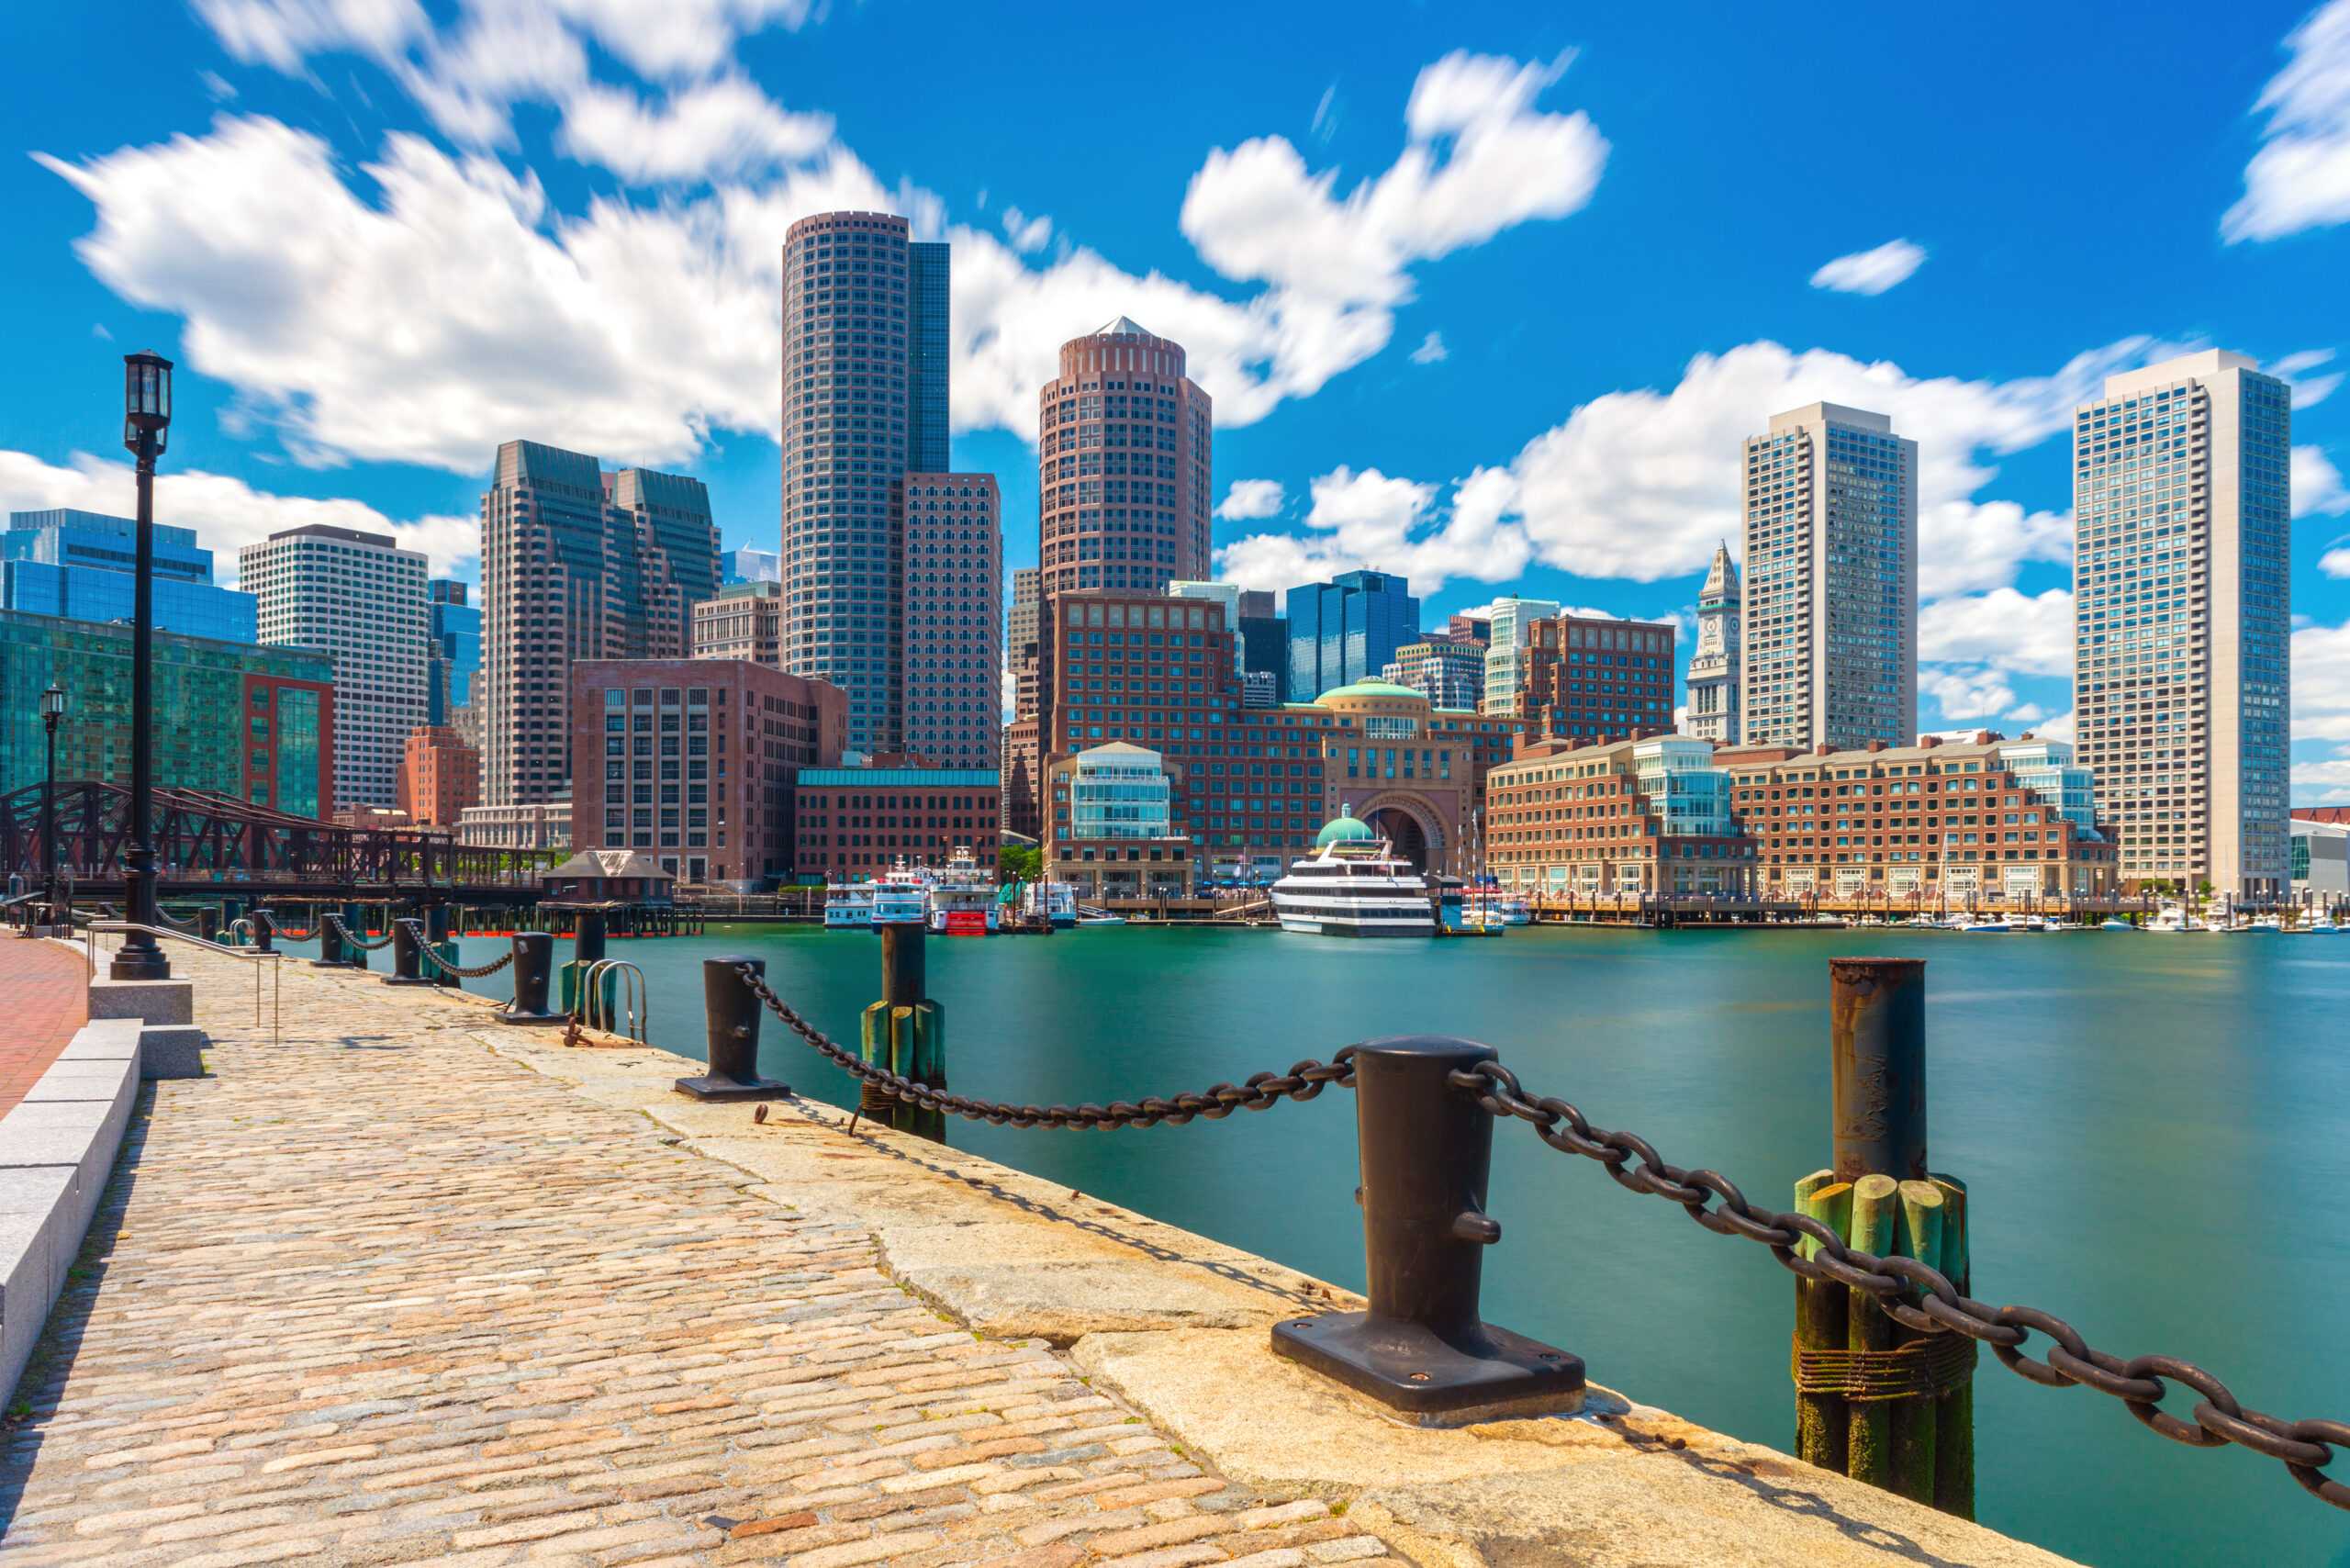 Boston,Skyline,In,Sunny,Summer,Day,,View,From,Harbor,On